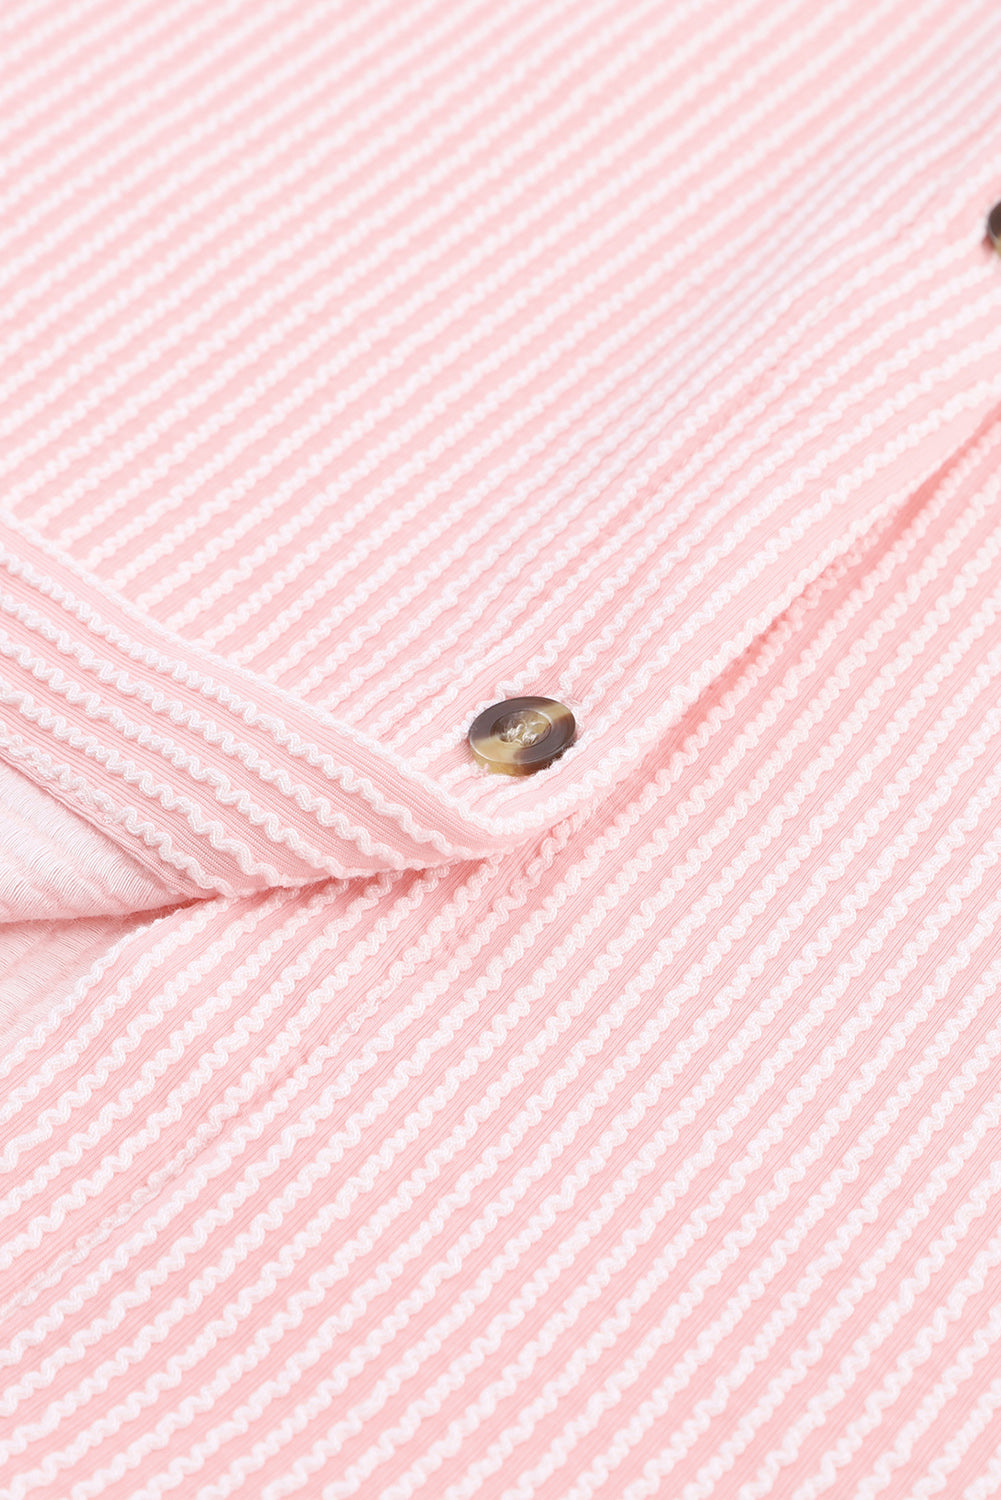 Pink Solid Color Textured Roll Tab Sleeve Shirt Shacket